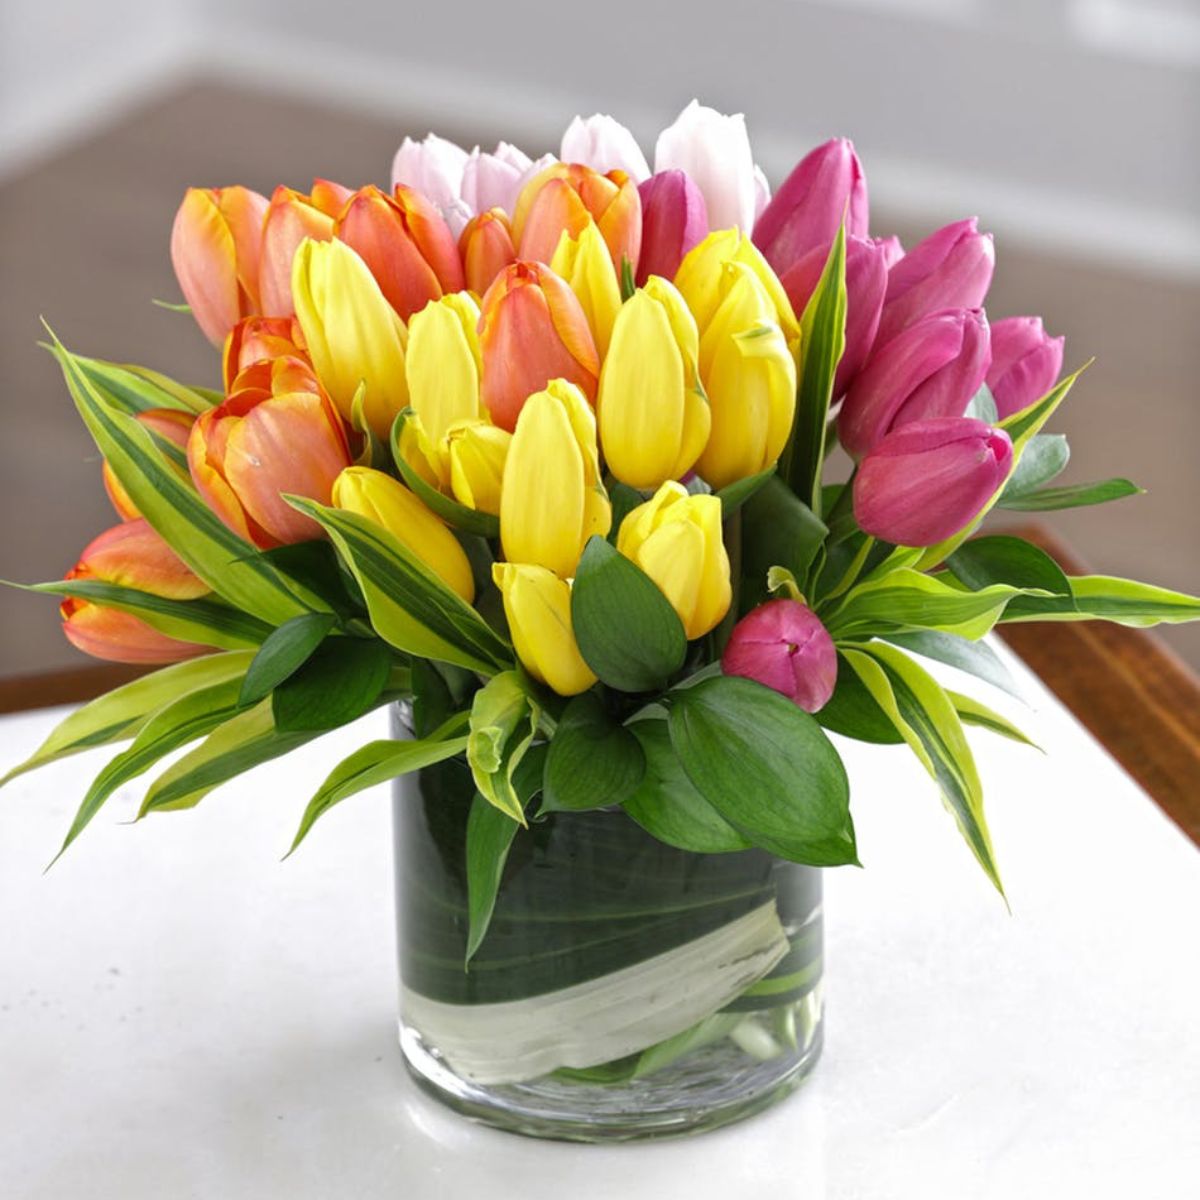 Tulip arrangement to give as a gift to your loved ones